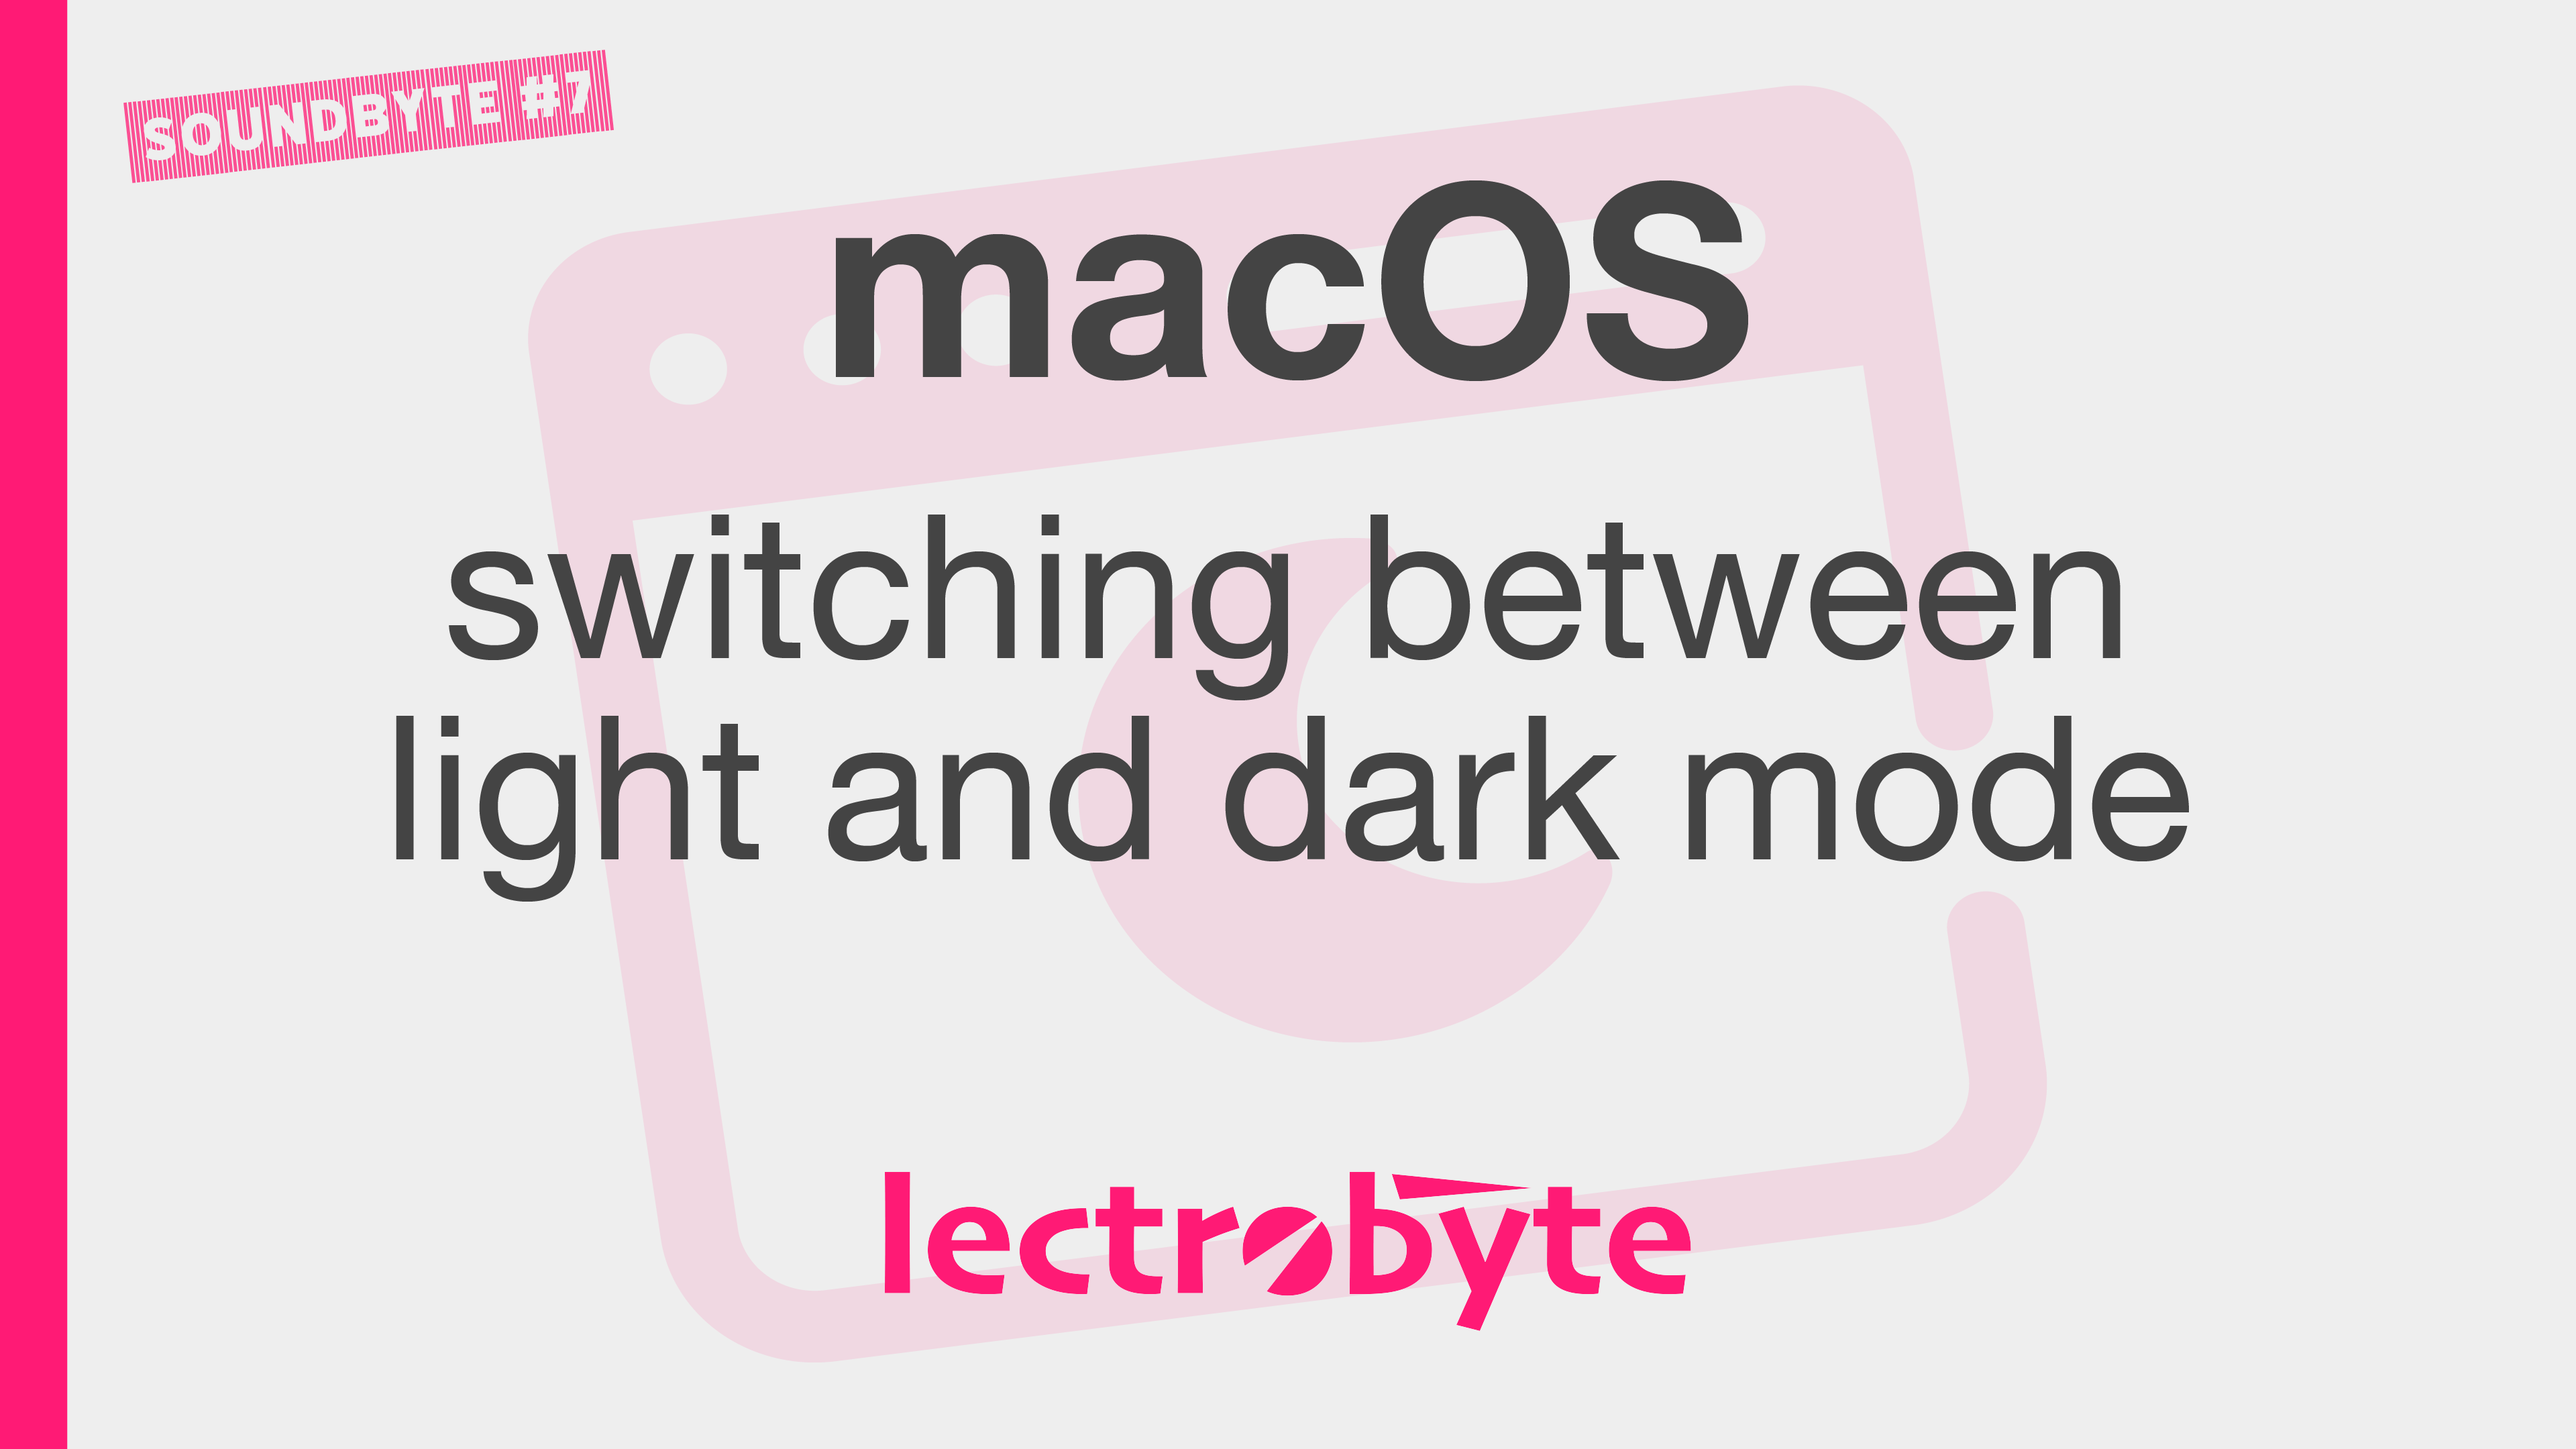 SOUNDBYTE #7 macOS Switching Between Light and Dark Mode artwork. Icon by Daniel Traoré @ The Noun Project.